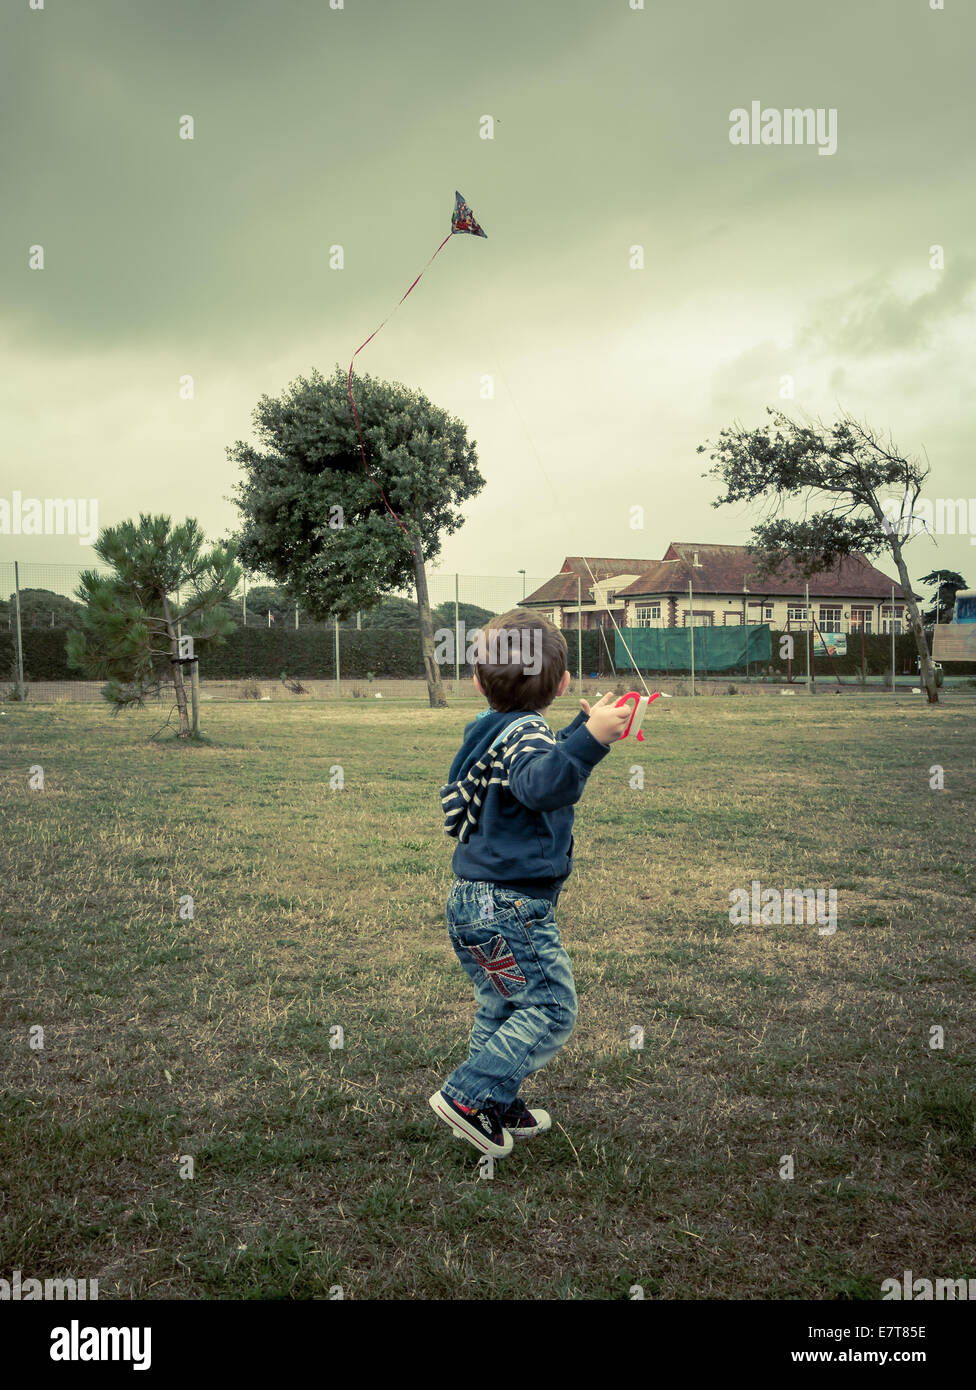 young boy flying a kite in windy weather with dark clouds Stock Photo